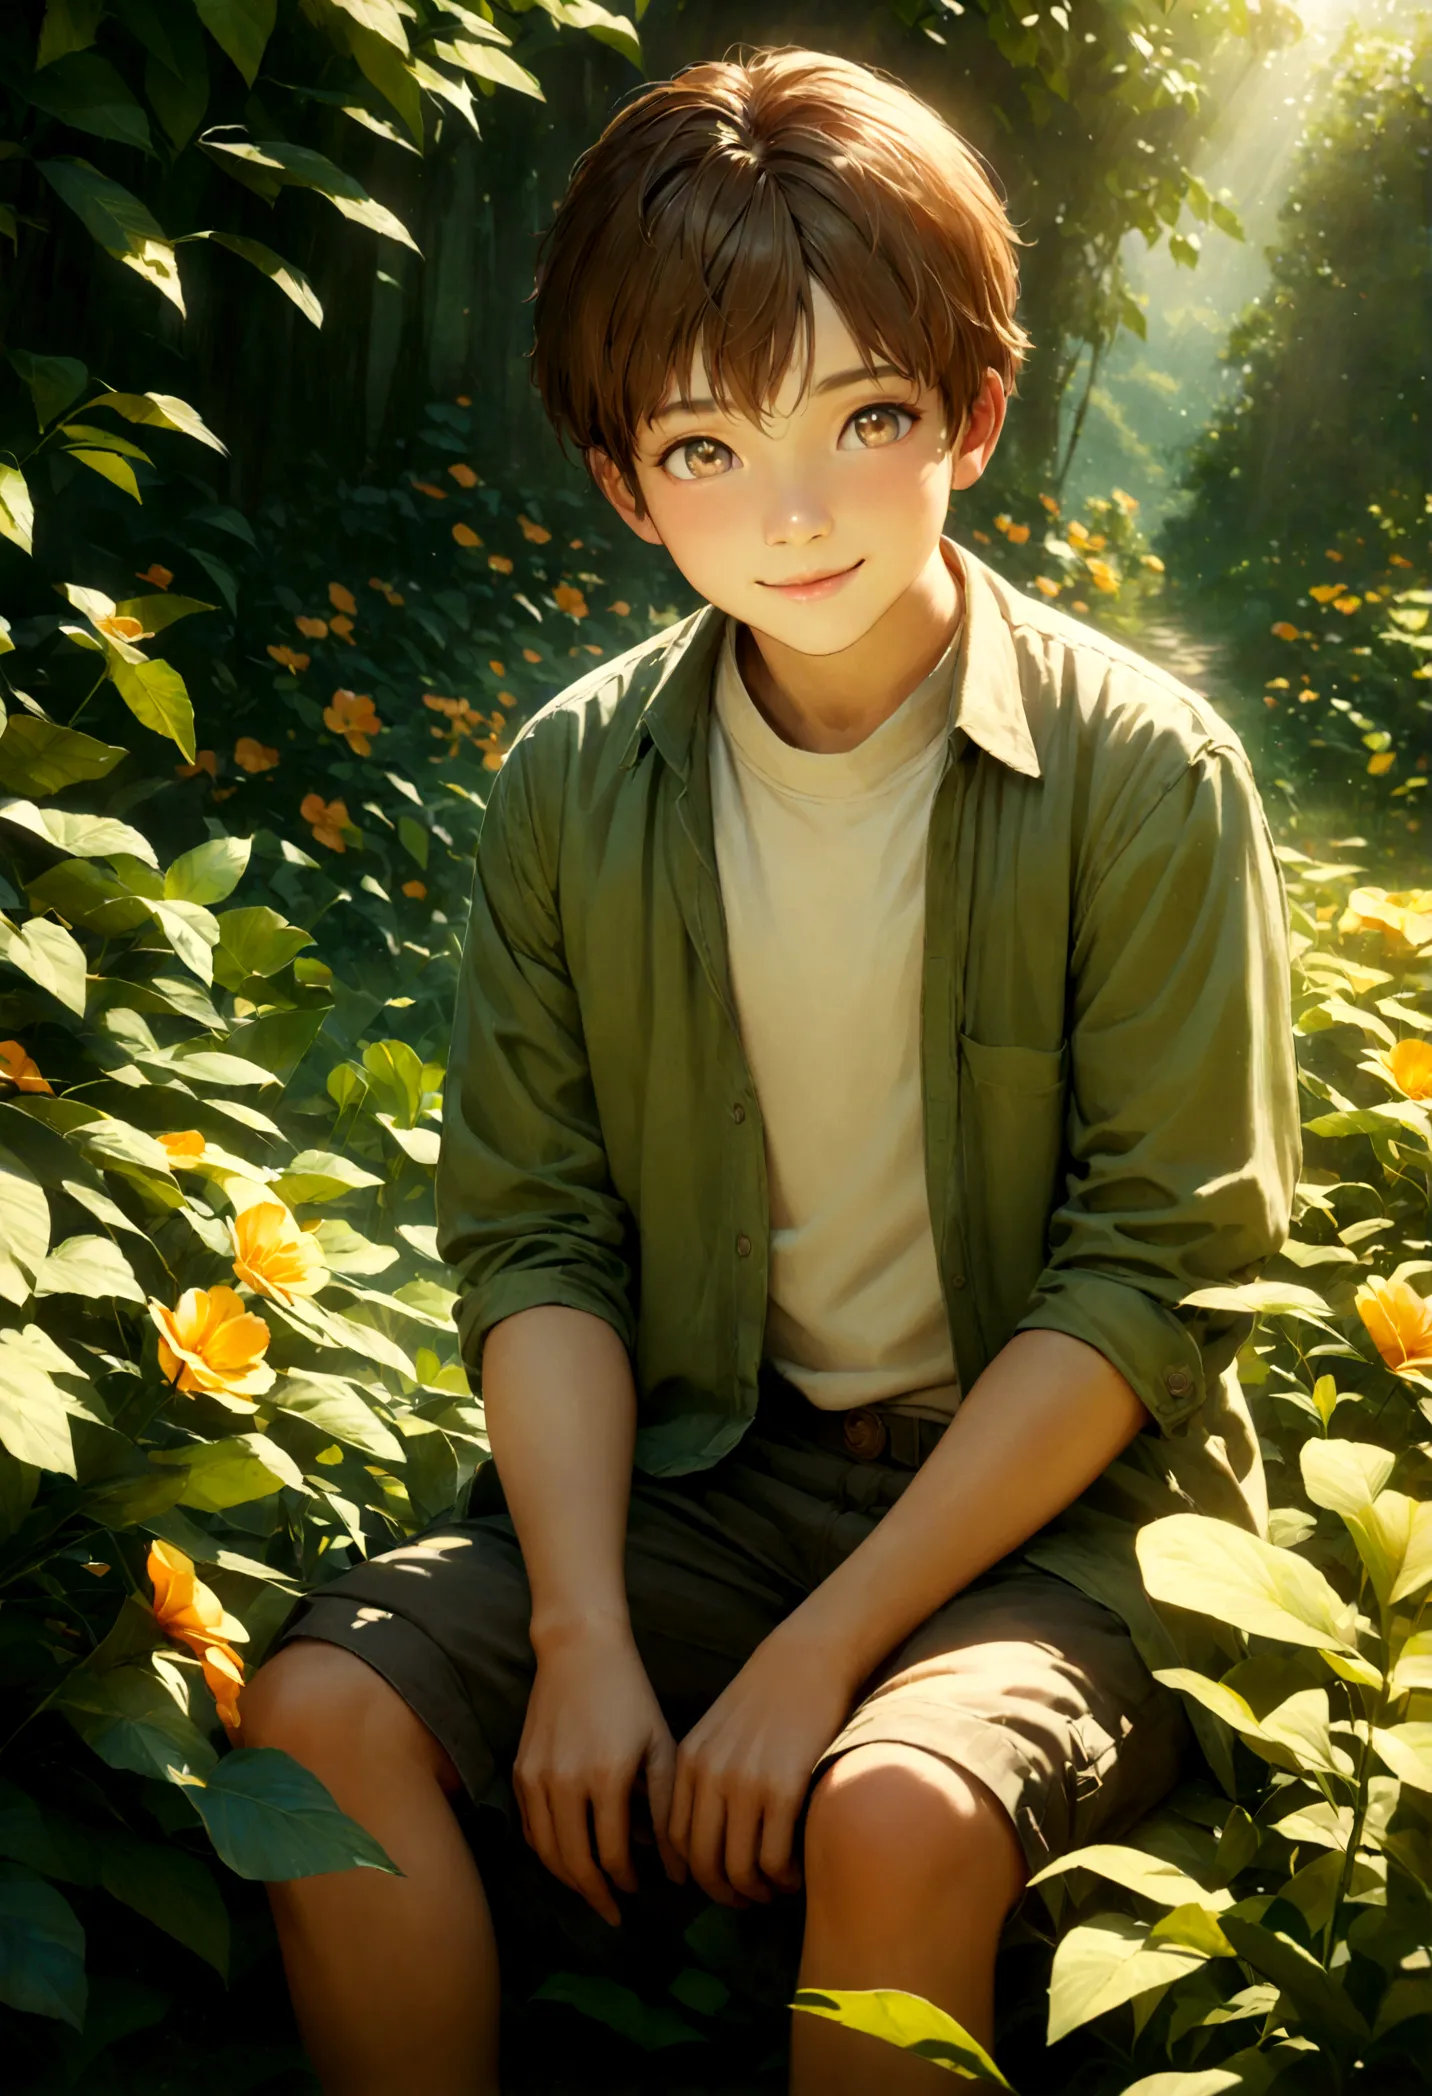 A young boy, detailed facial features, beautiful eyes, cute smile, short brown hair, sitting outdoors in a lush green garden, su...